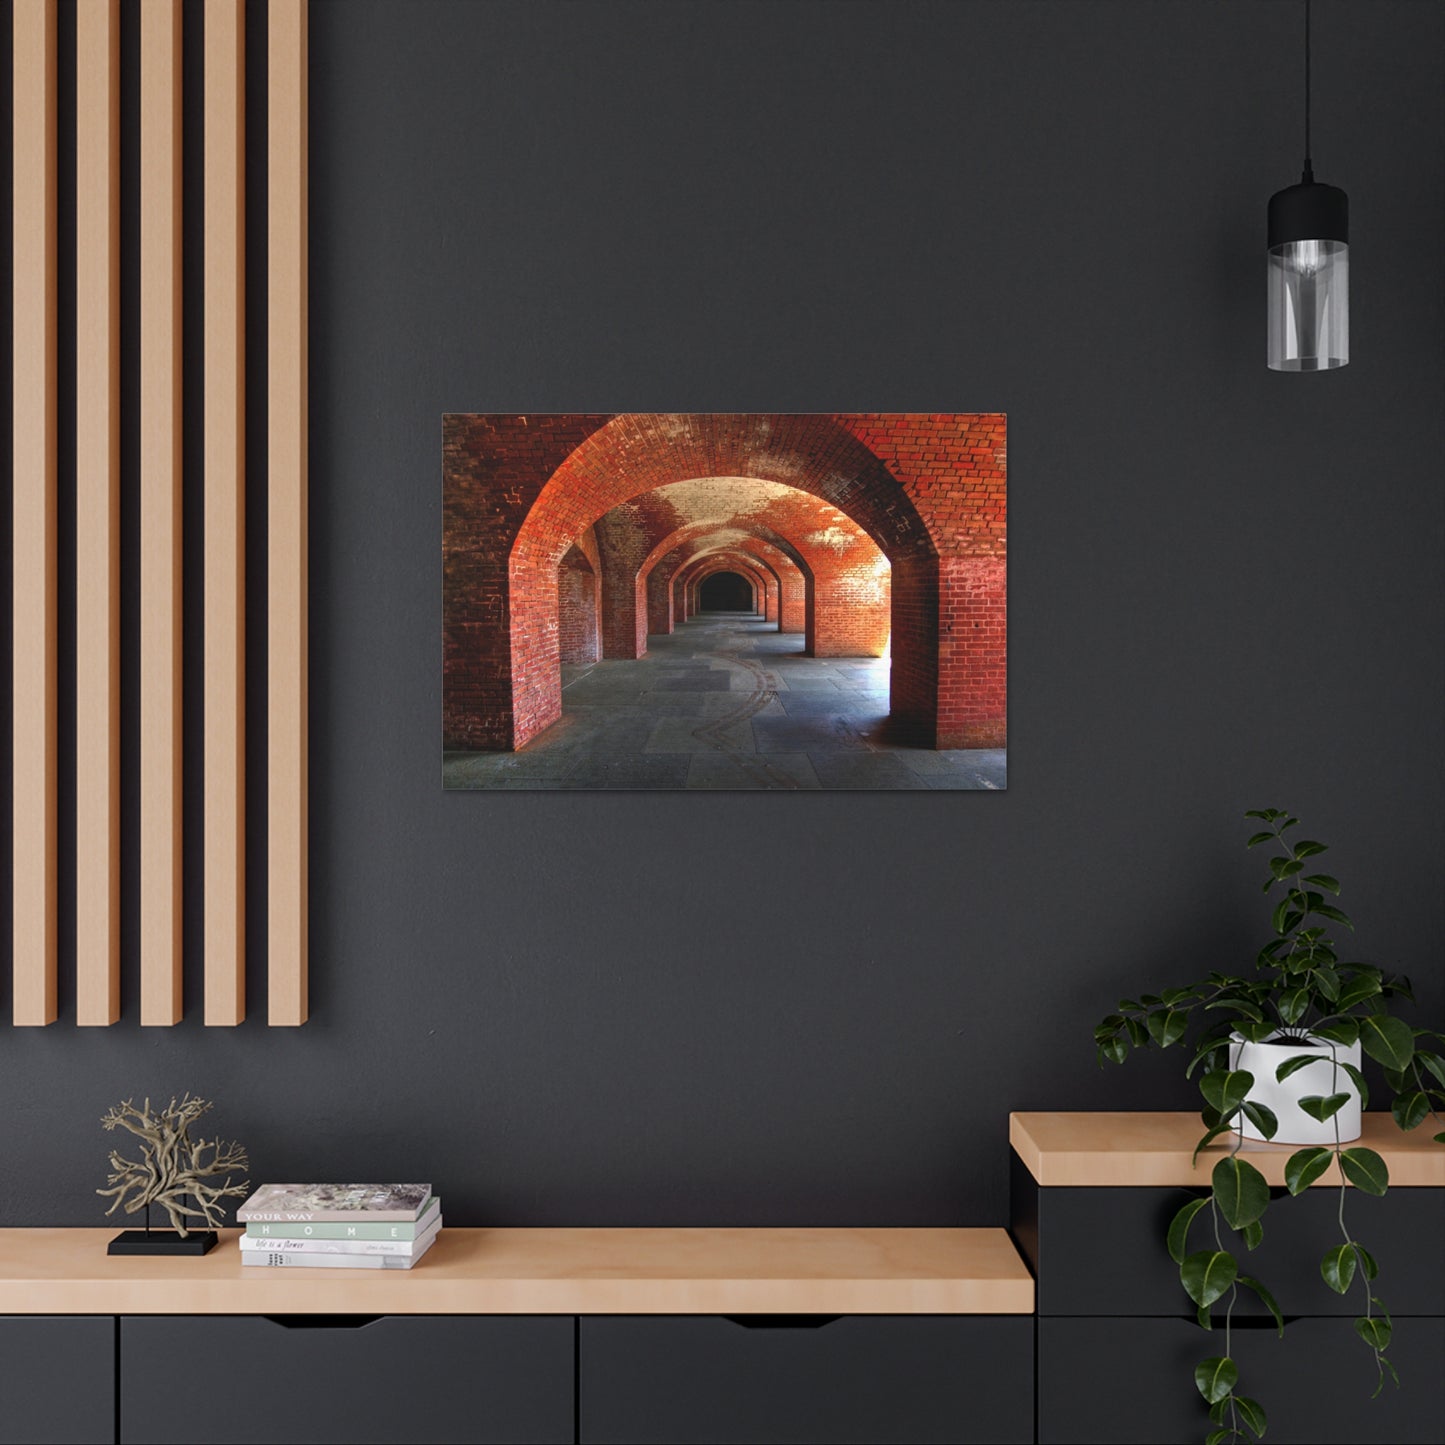 Canvas Print Of The Arches At Fort Point In San Francisco For Wall Art